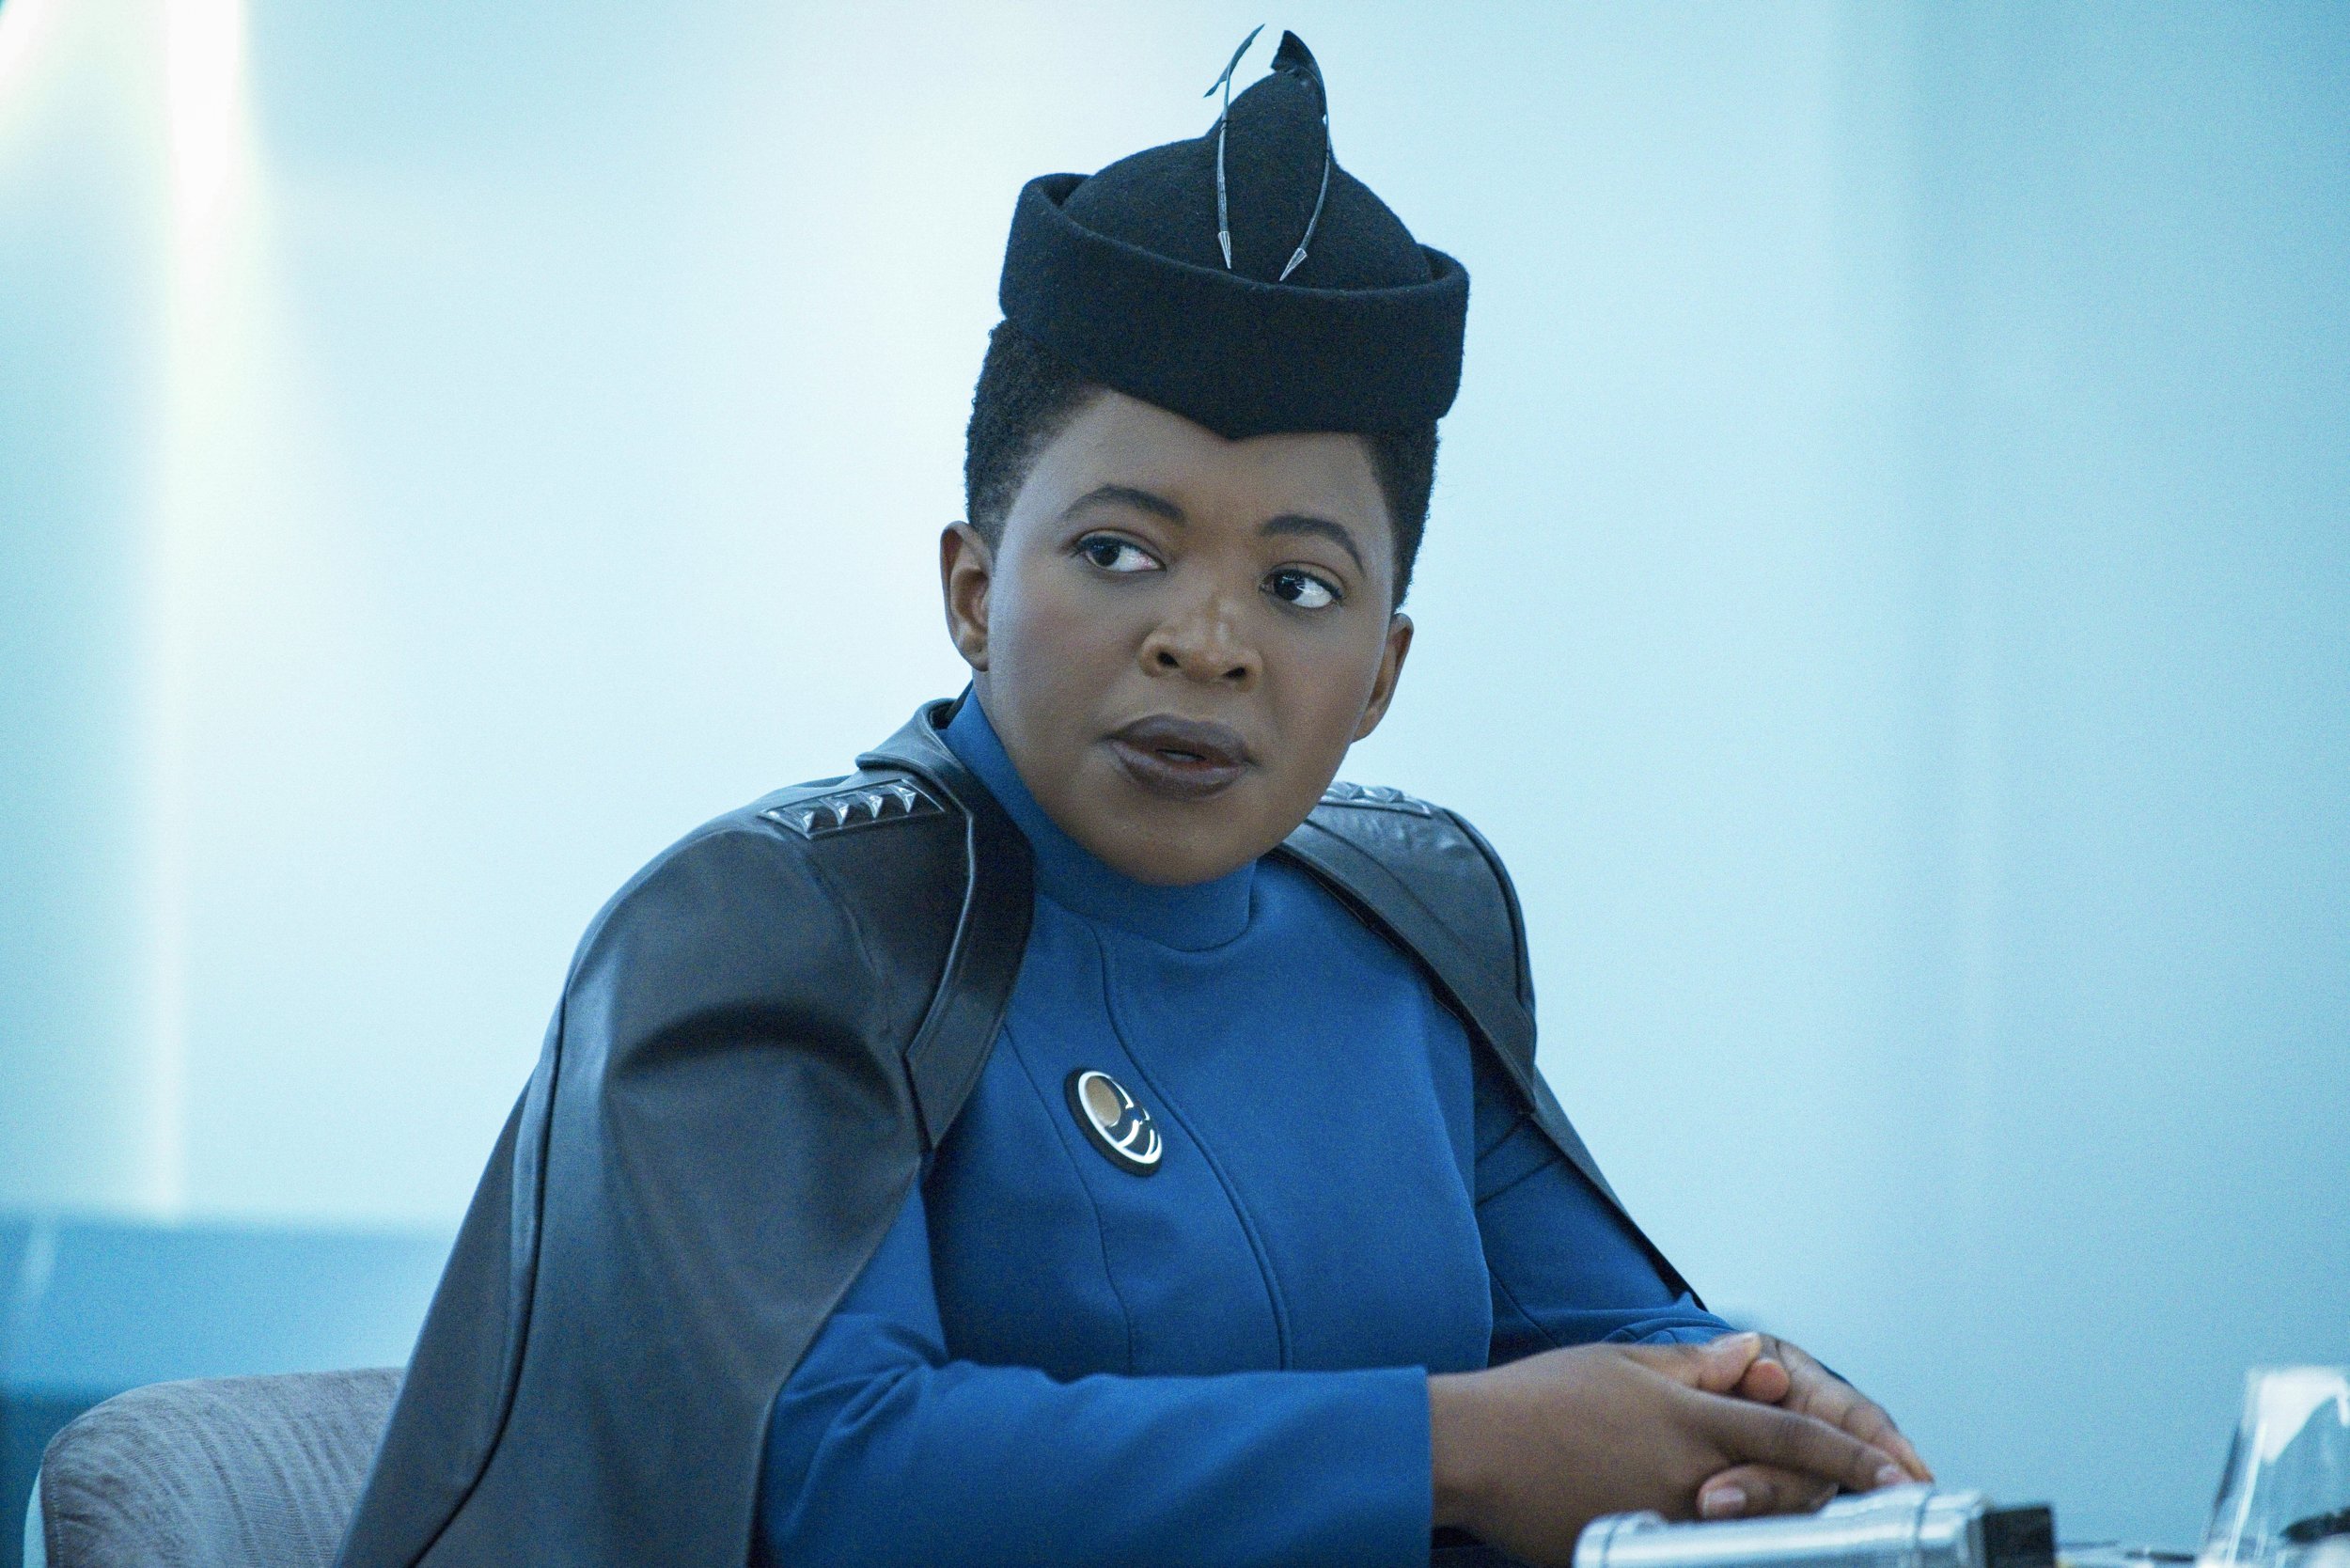   Pictured: Phumzile Sitole as Capt. Ndoye of the Paramount+ original series STAR TREK: DISCOVERY. Photo Cr: Michael Gibson/Paramount+ (C) 2021 CBS Interactive. All Rights Reserved.  